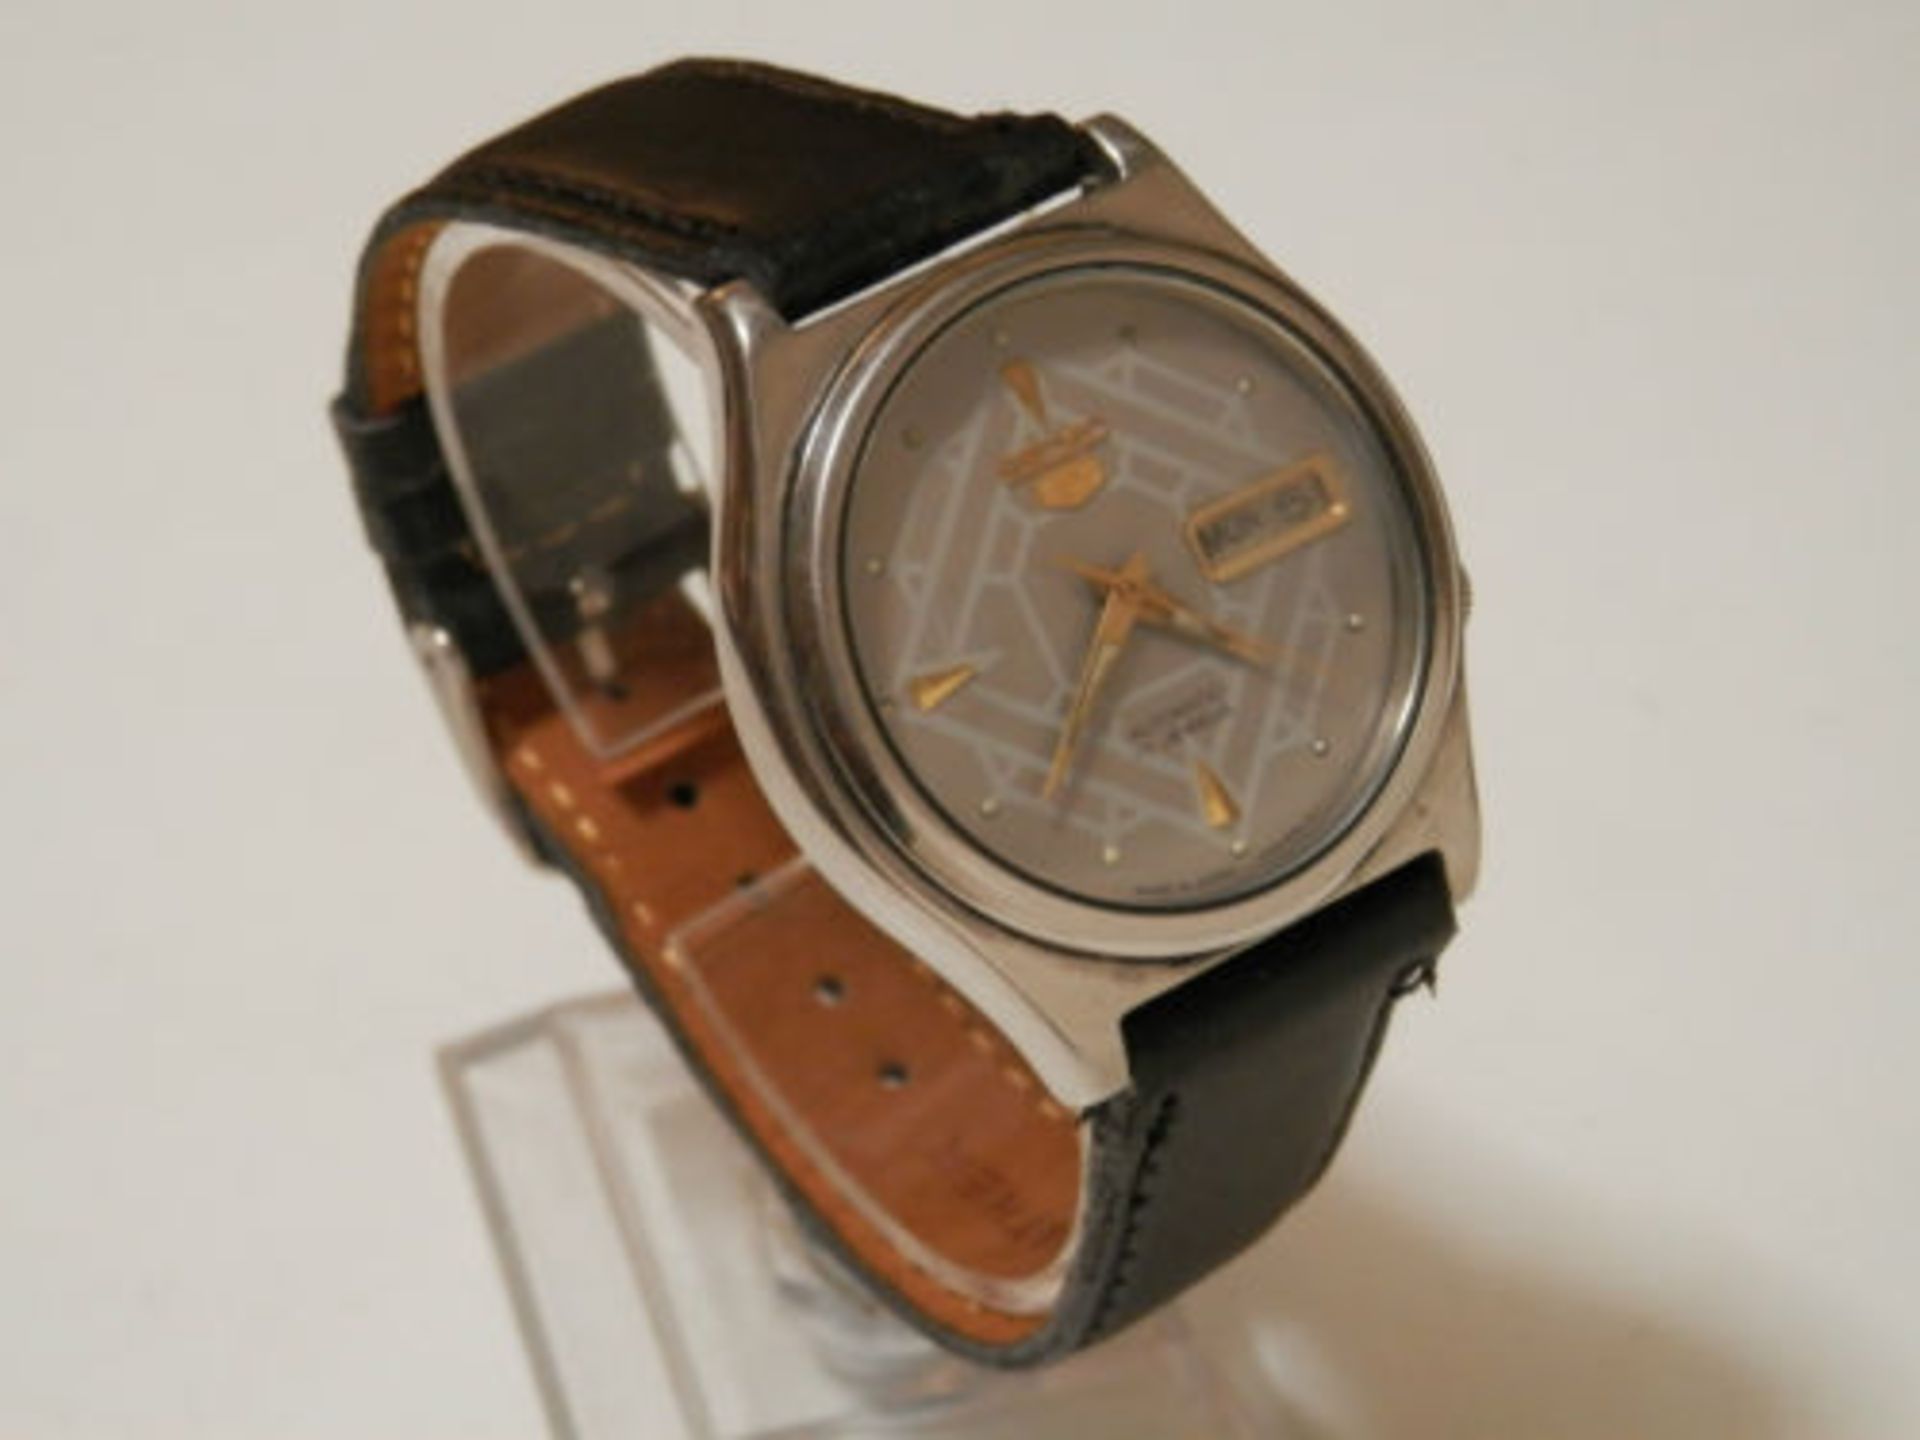 1984 WORKING SEIKO 7009 AUTOMATIC 17 JEWEL DAY/DATE WATCH, STAINLESS CASE. - Image 5 of 13